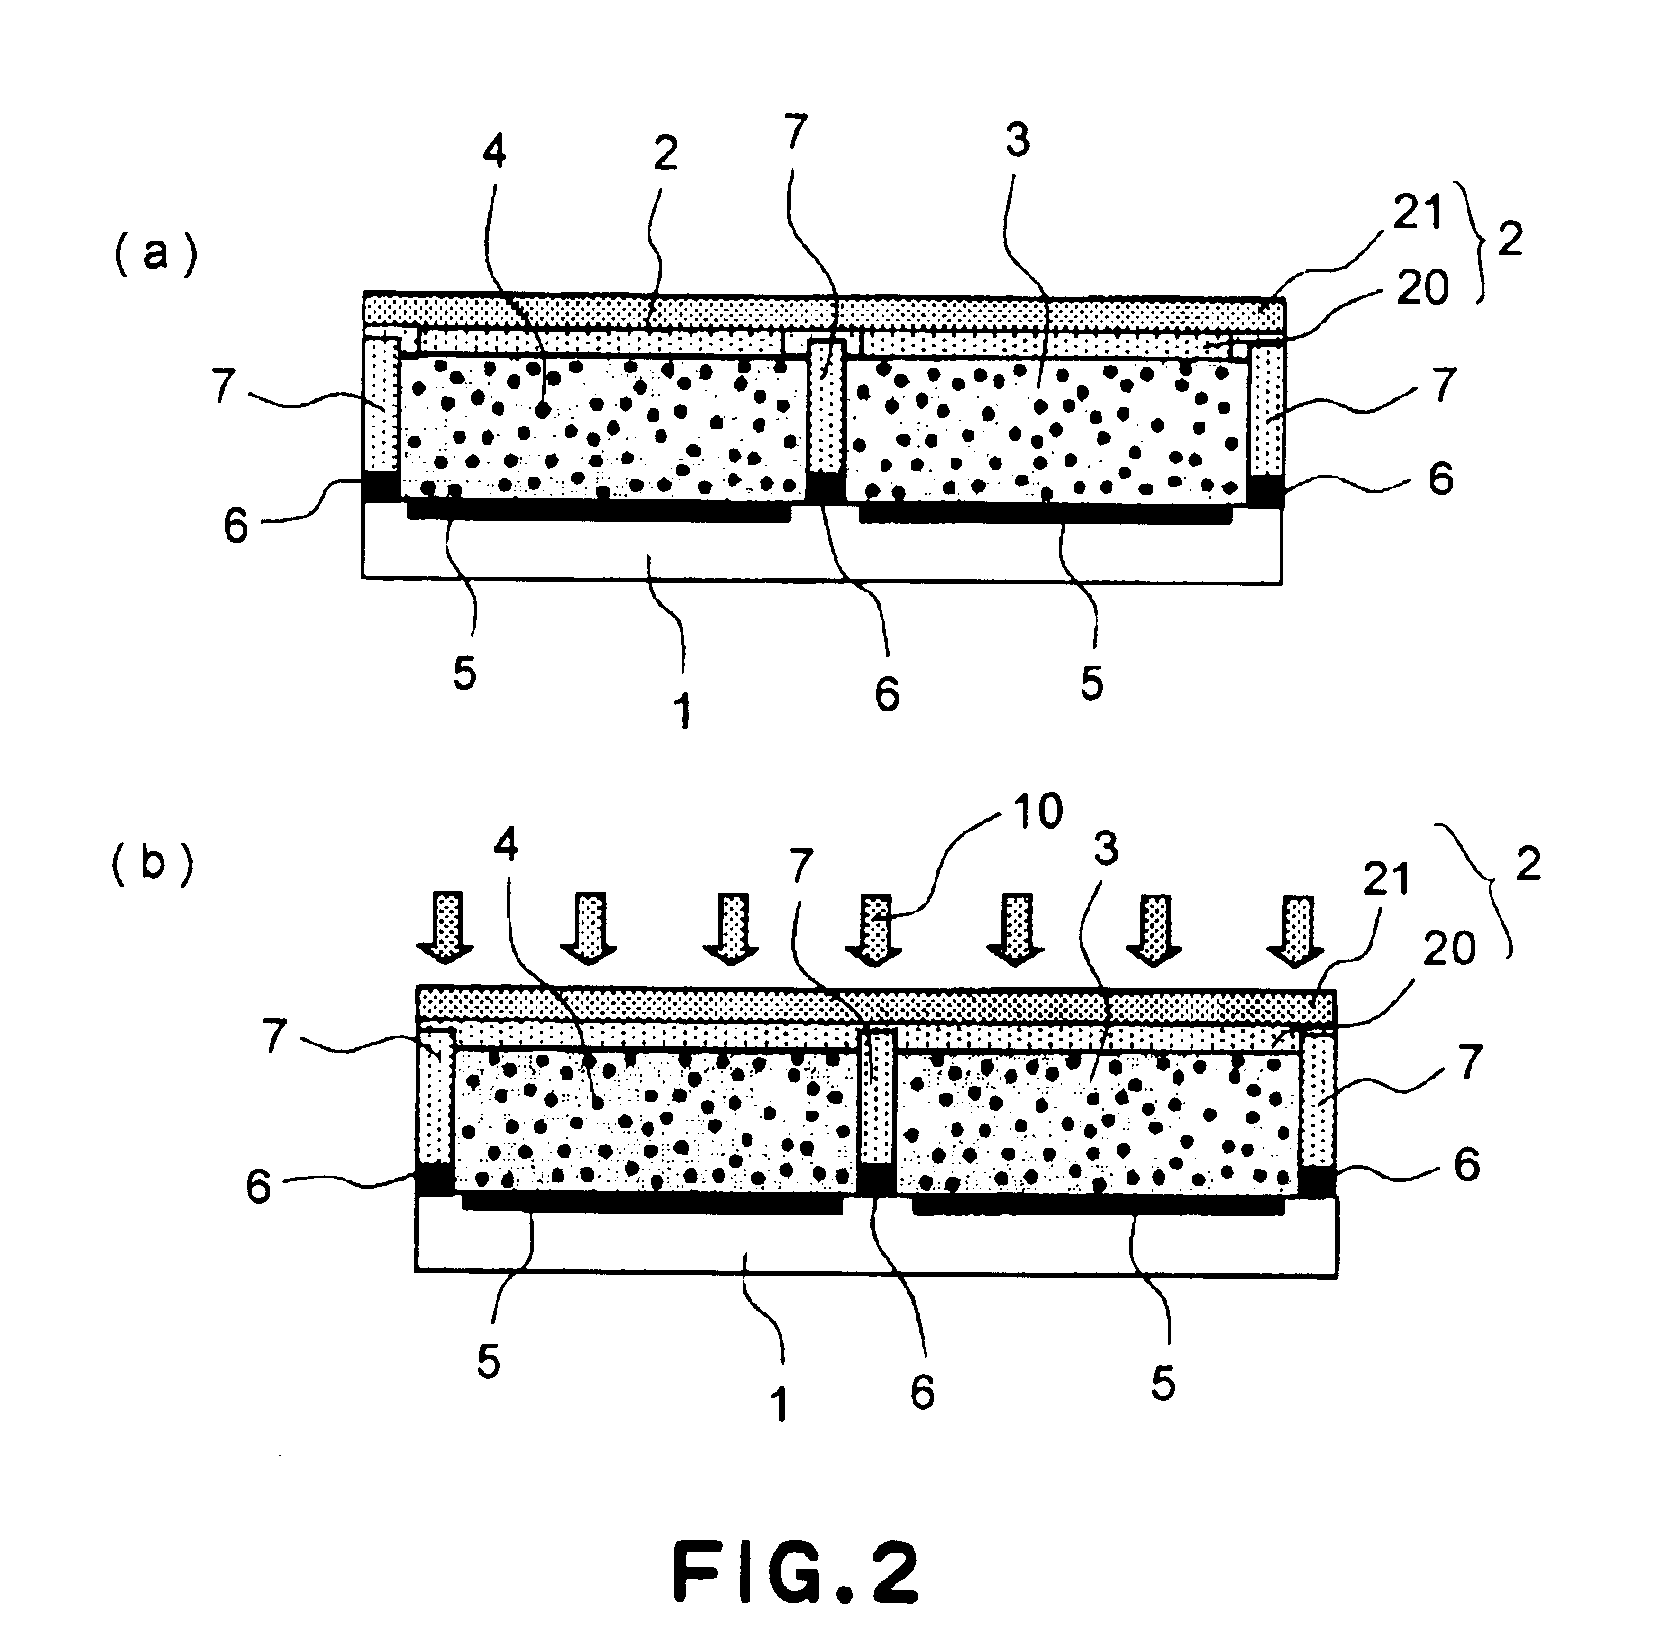 Process for producing electrophoretic display device